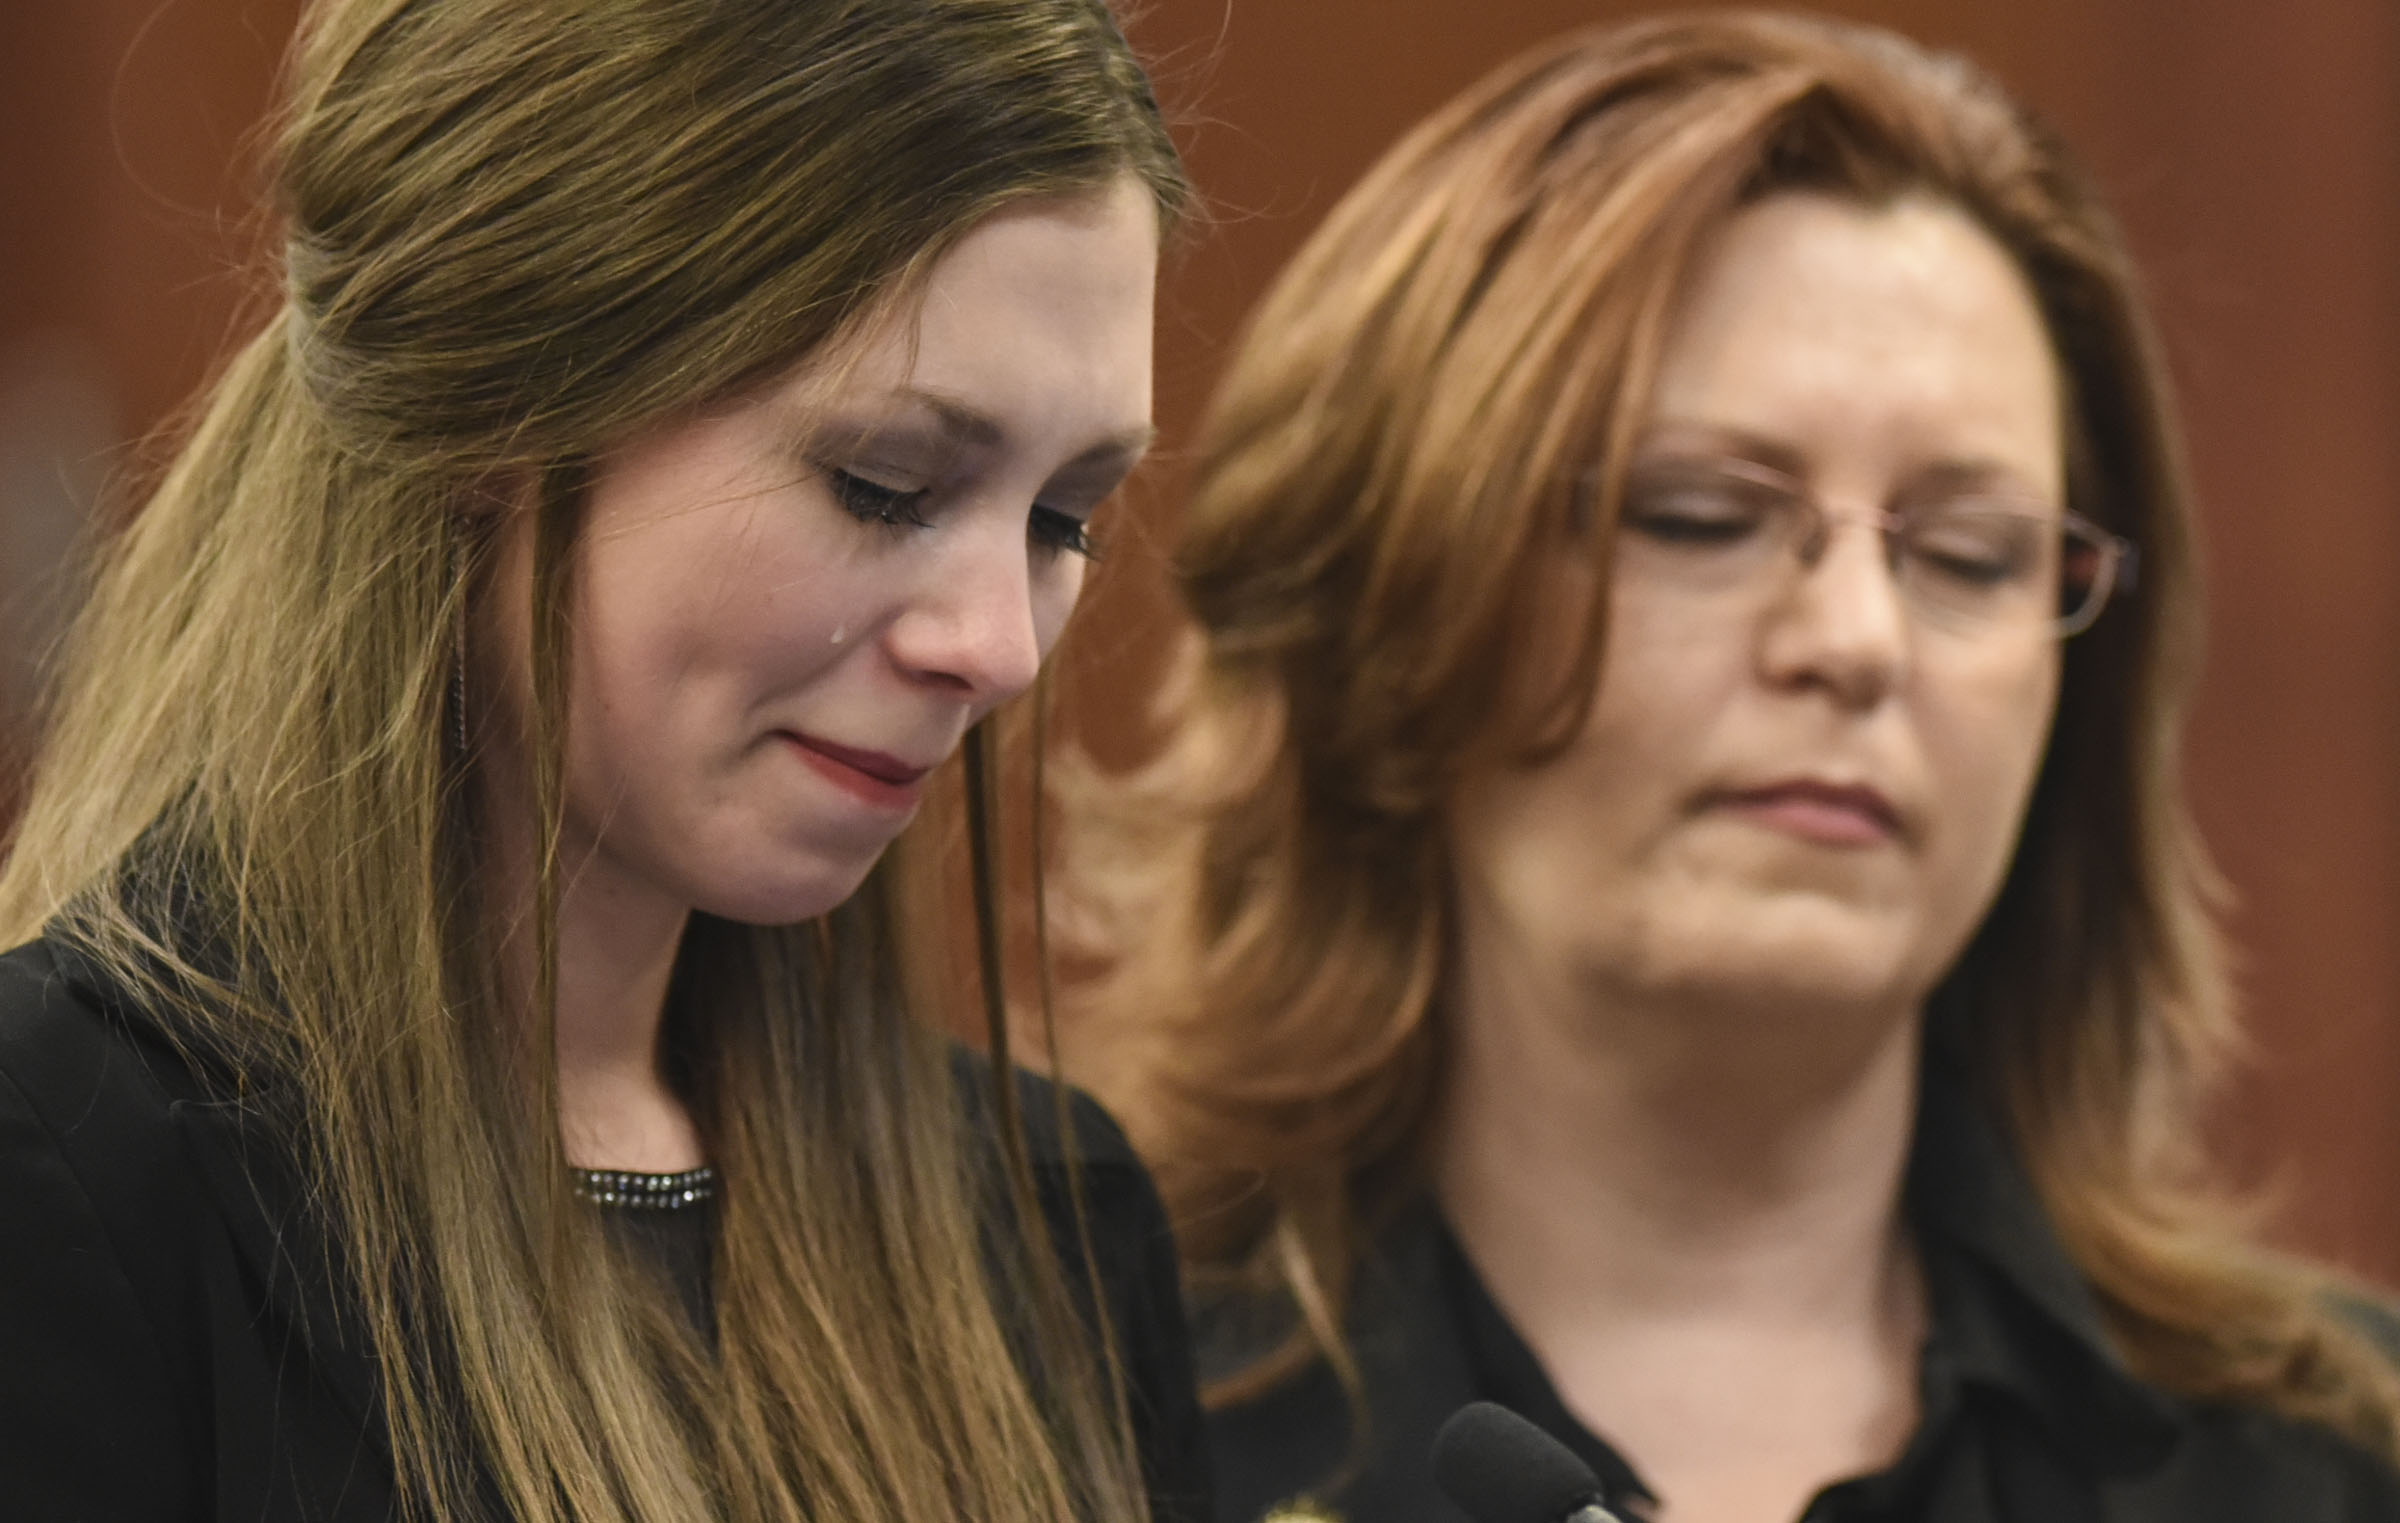 Dancer Jessica Smith and her mother Kimberly listen as Circuit Judge Rosemarie Aquilina speaks during the third day of victim impact statements in the trial of doctor Larry Nassar, in Lansing, Mich., Jan. 18, 2018.